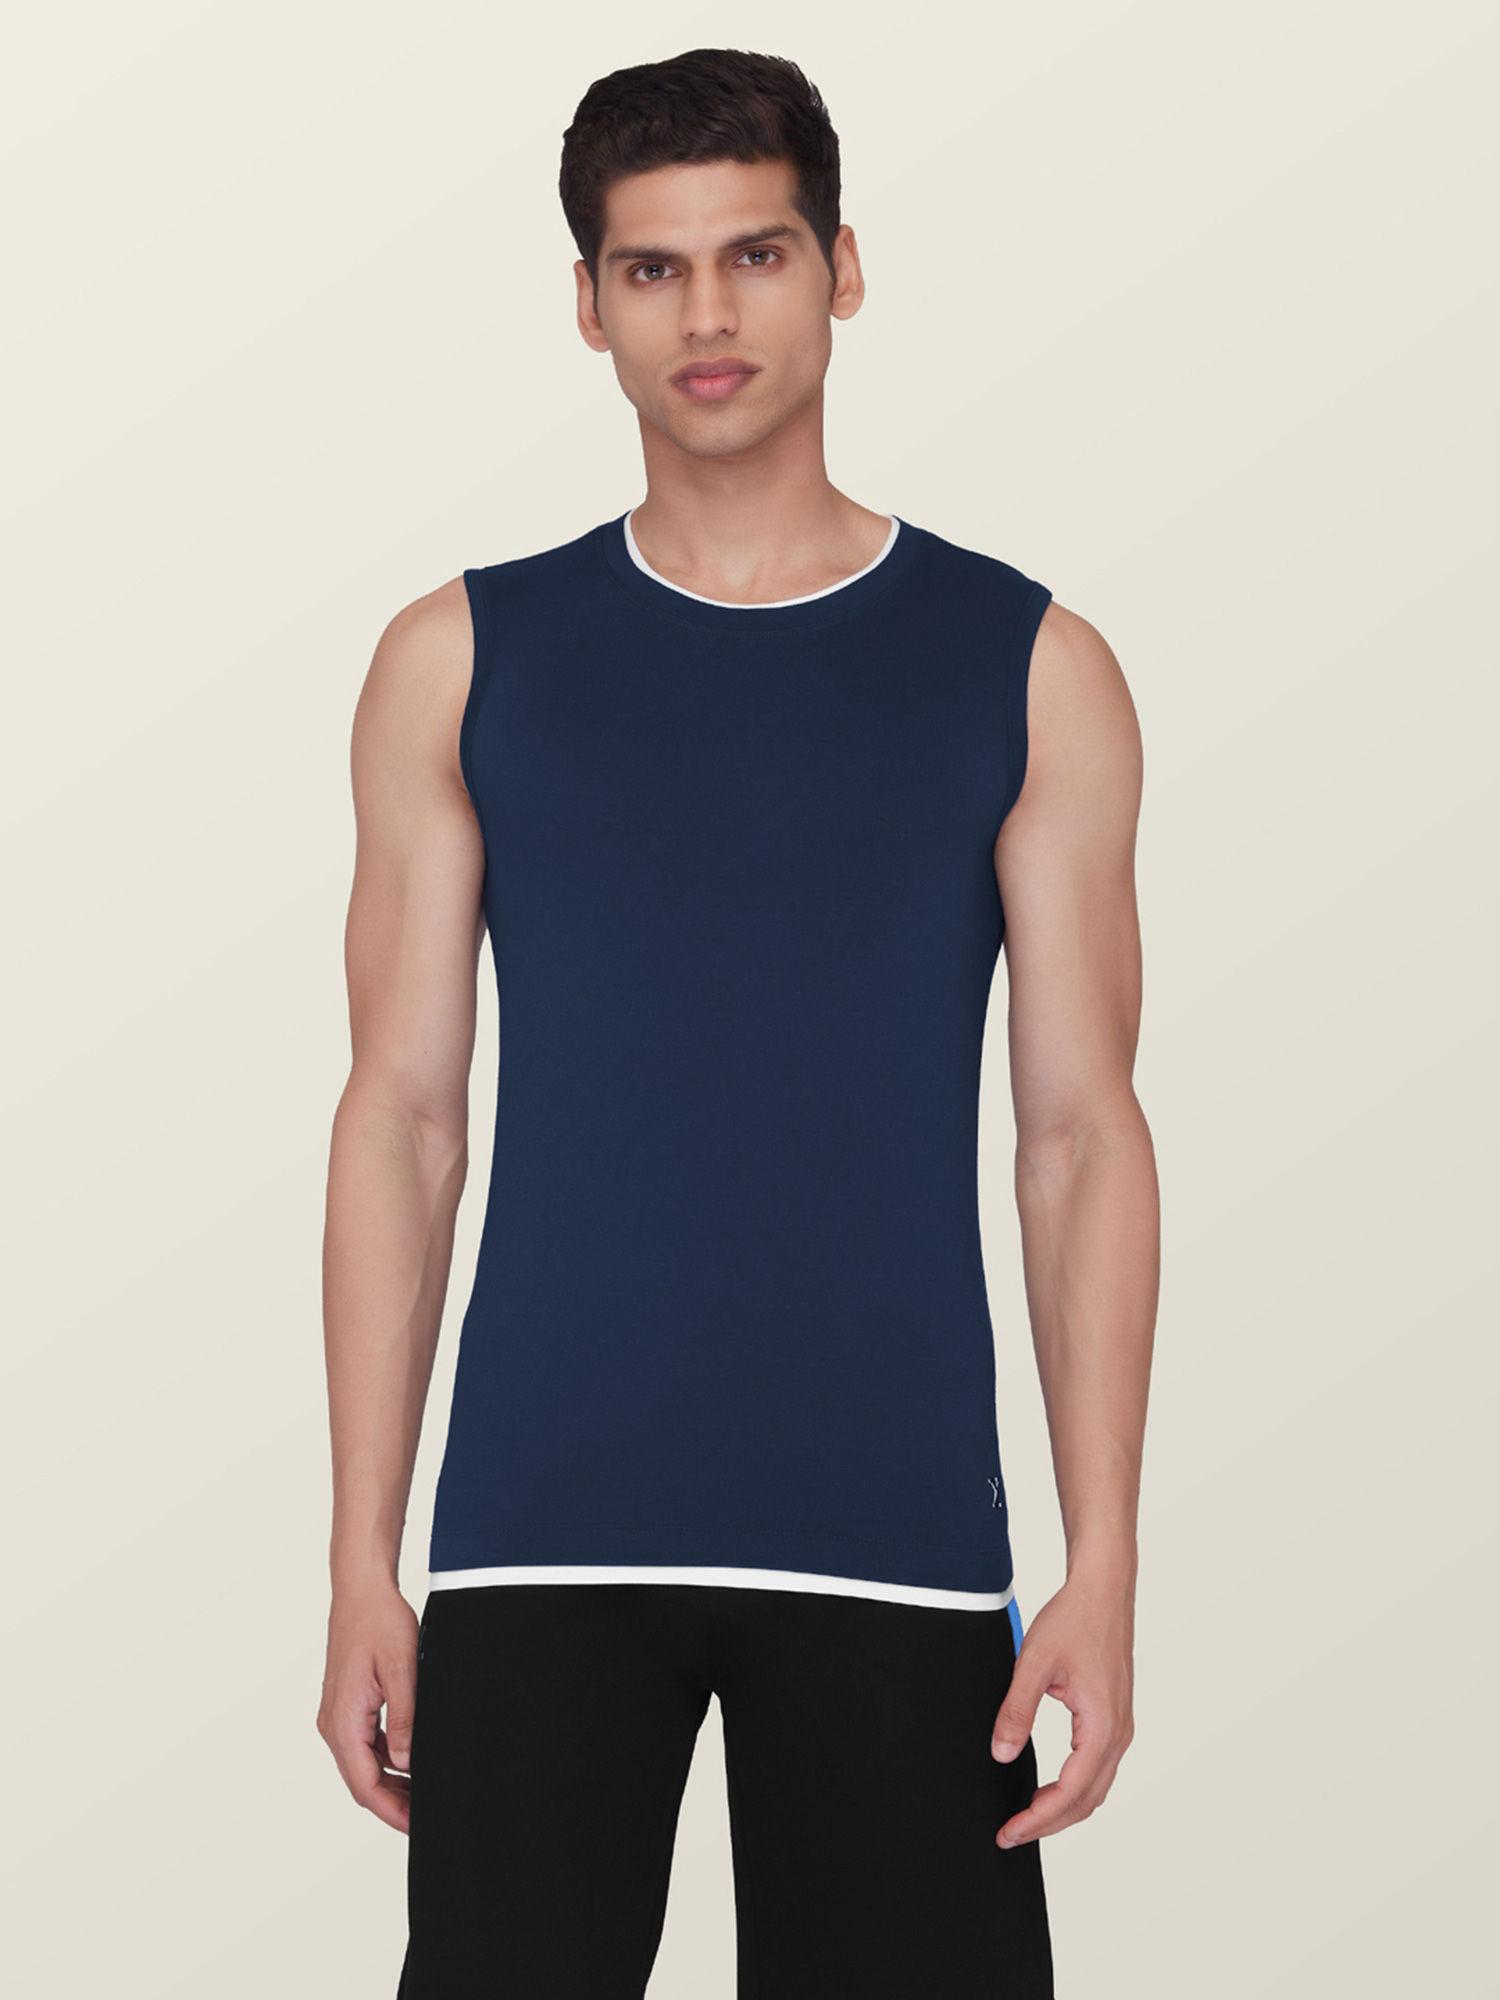 mens super combed cotton gym vest for men with anti-bacterial silver finish navy blue